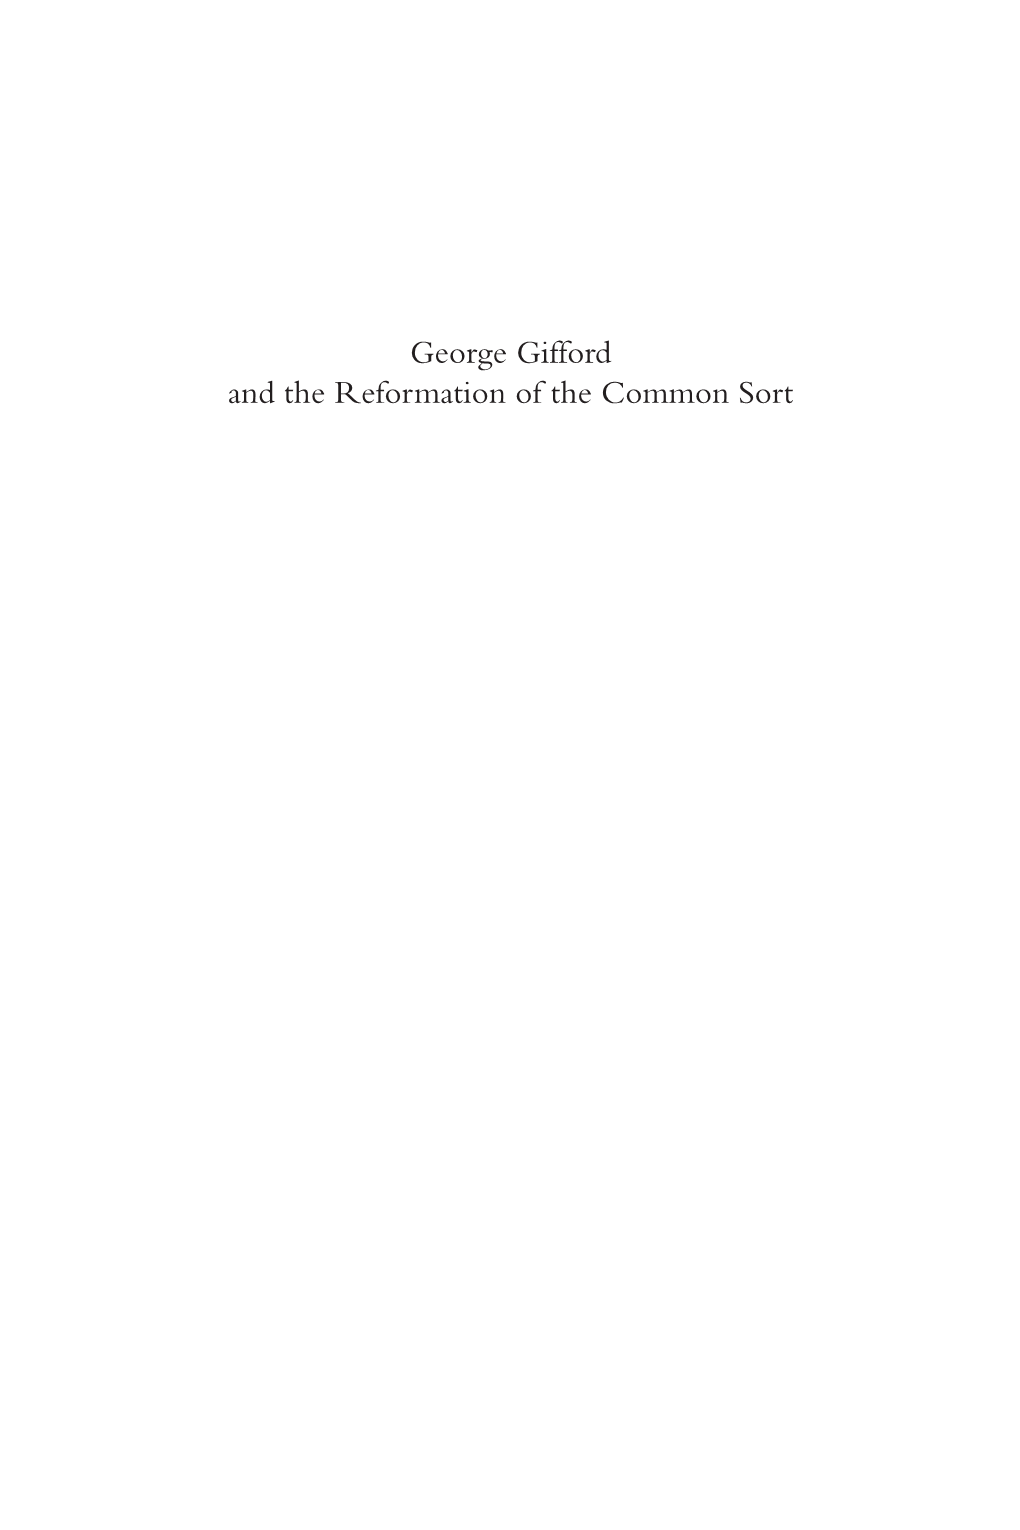 George Gifford and the Reformation of the Common Sort